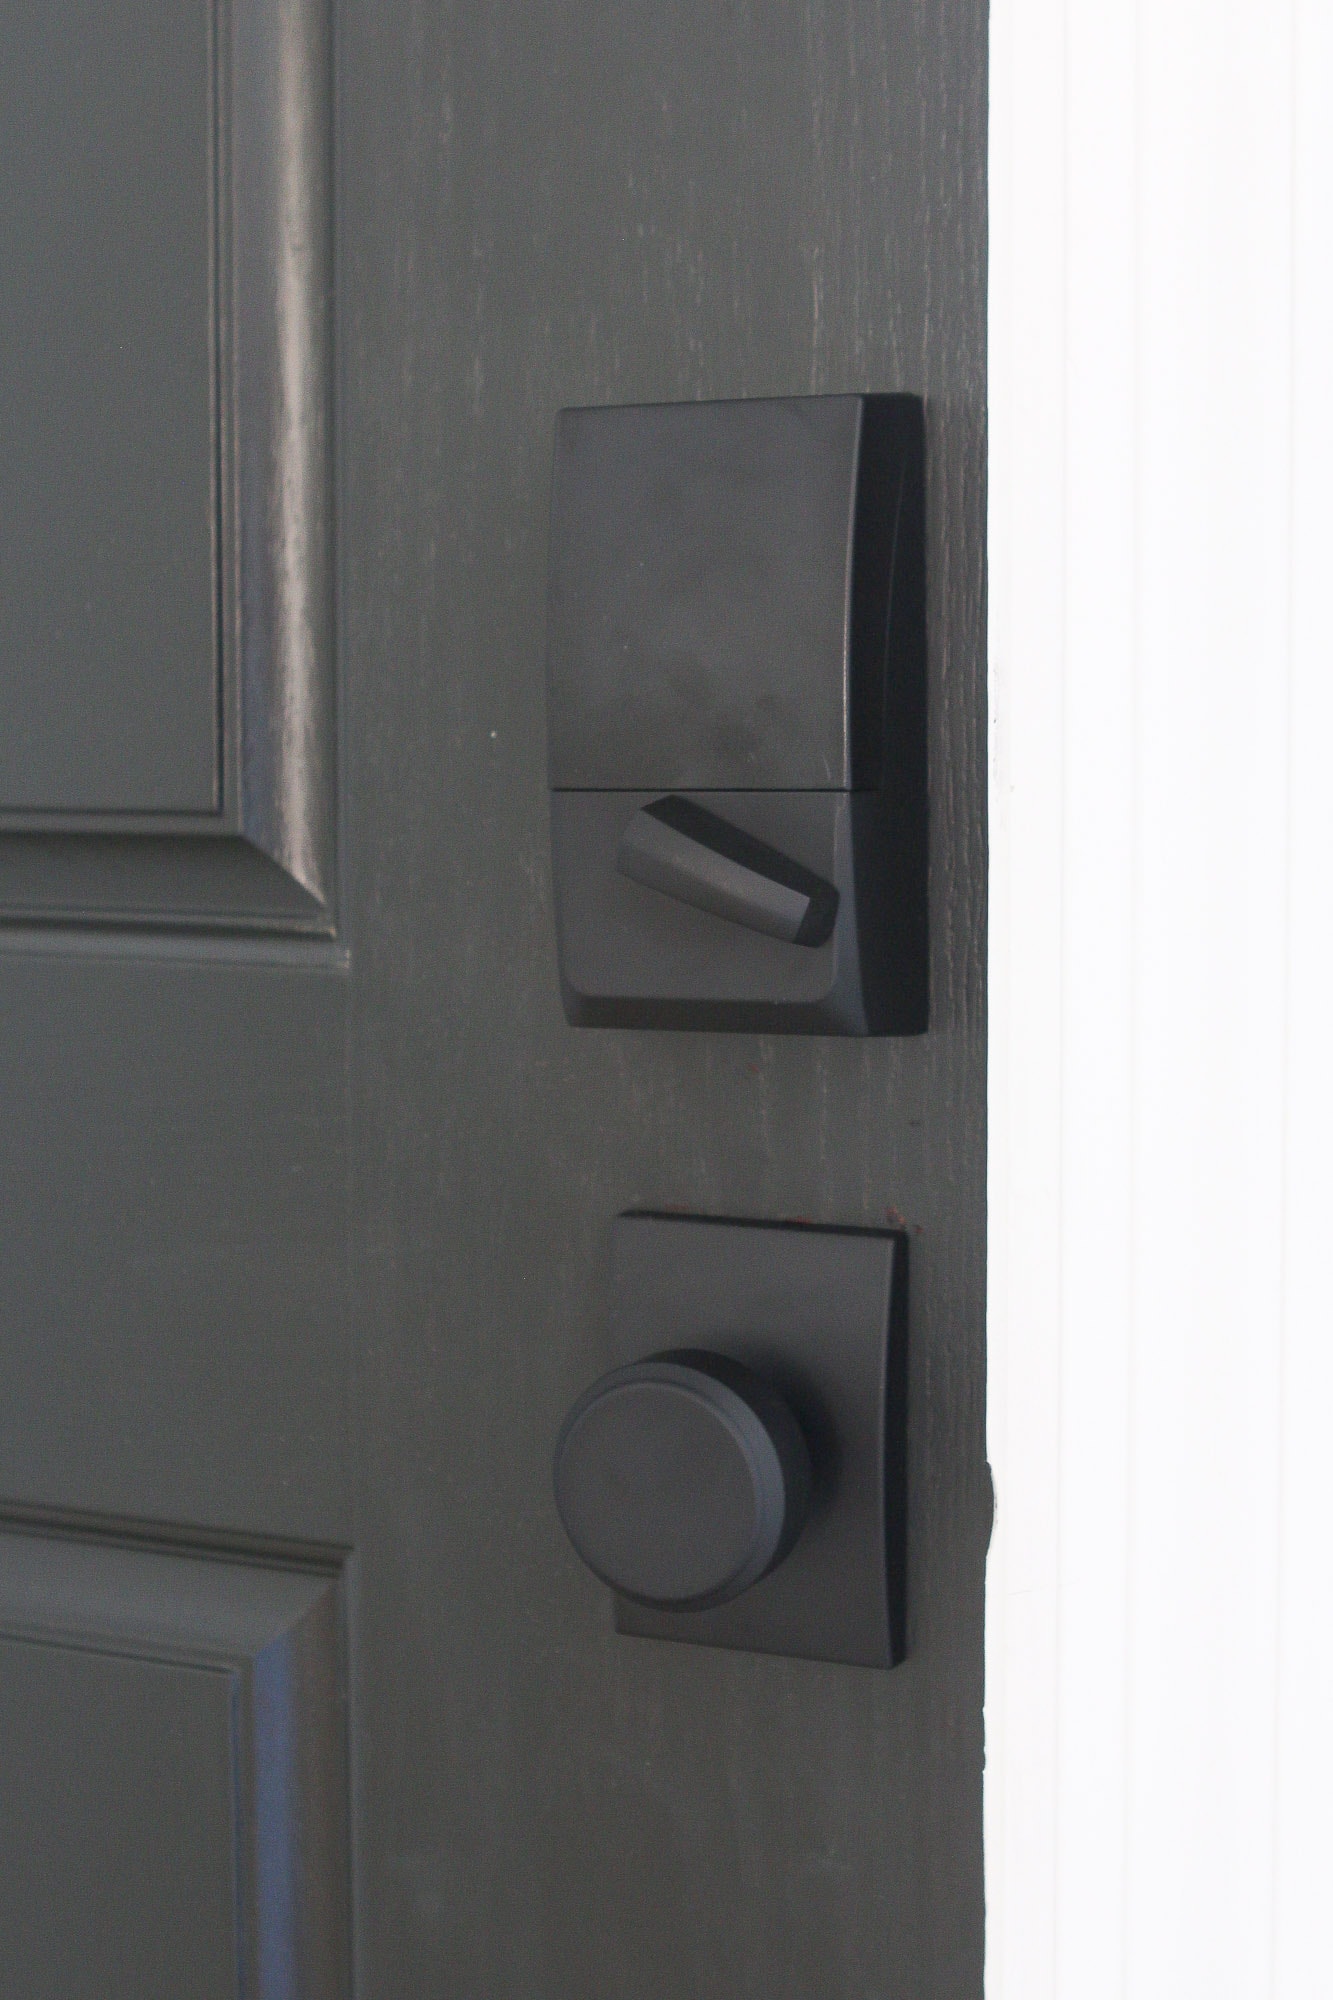 Hardware on the interior of the door